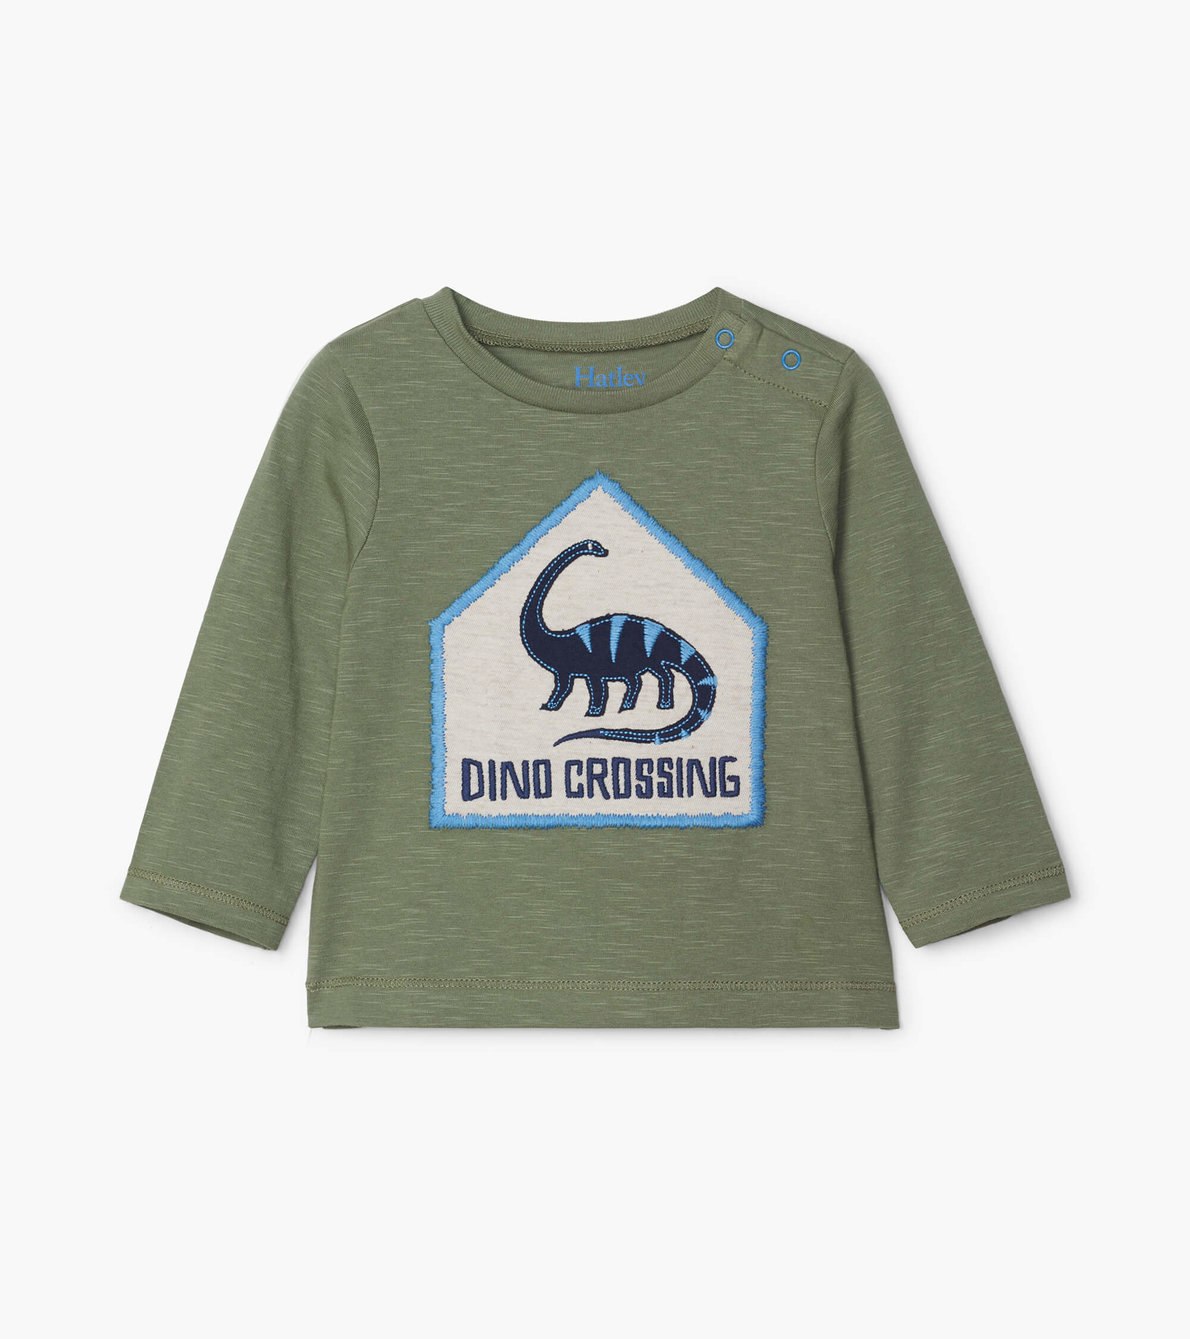 View larger image of Dino Crossing Long Sleeve Baby Tee